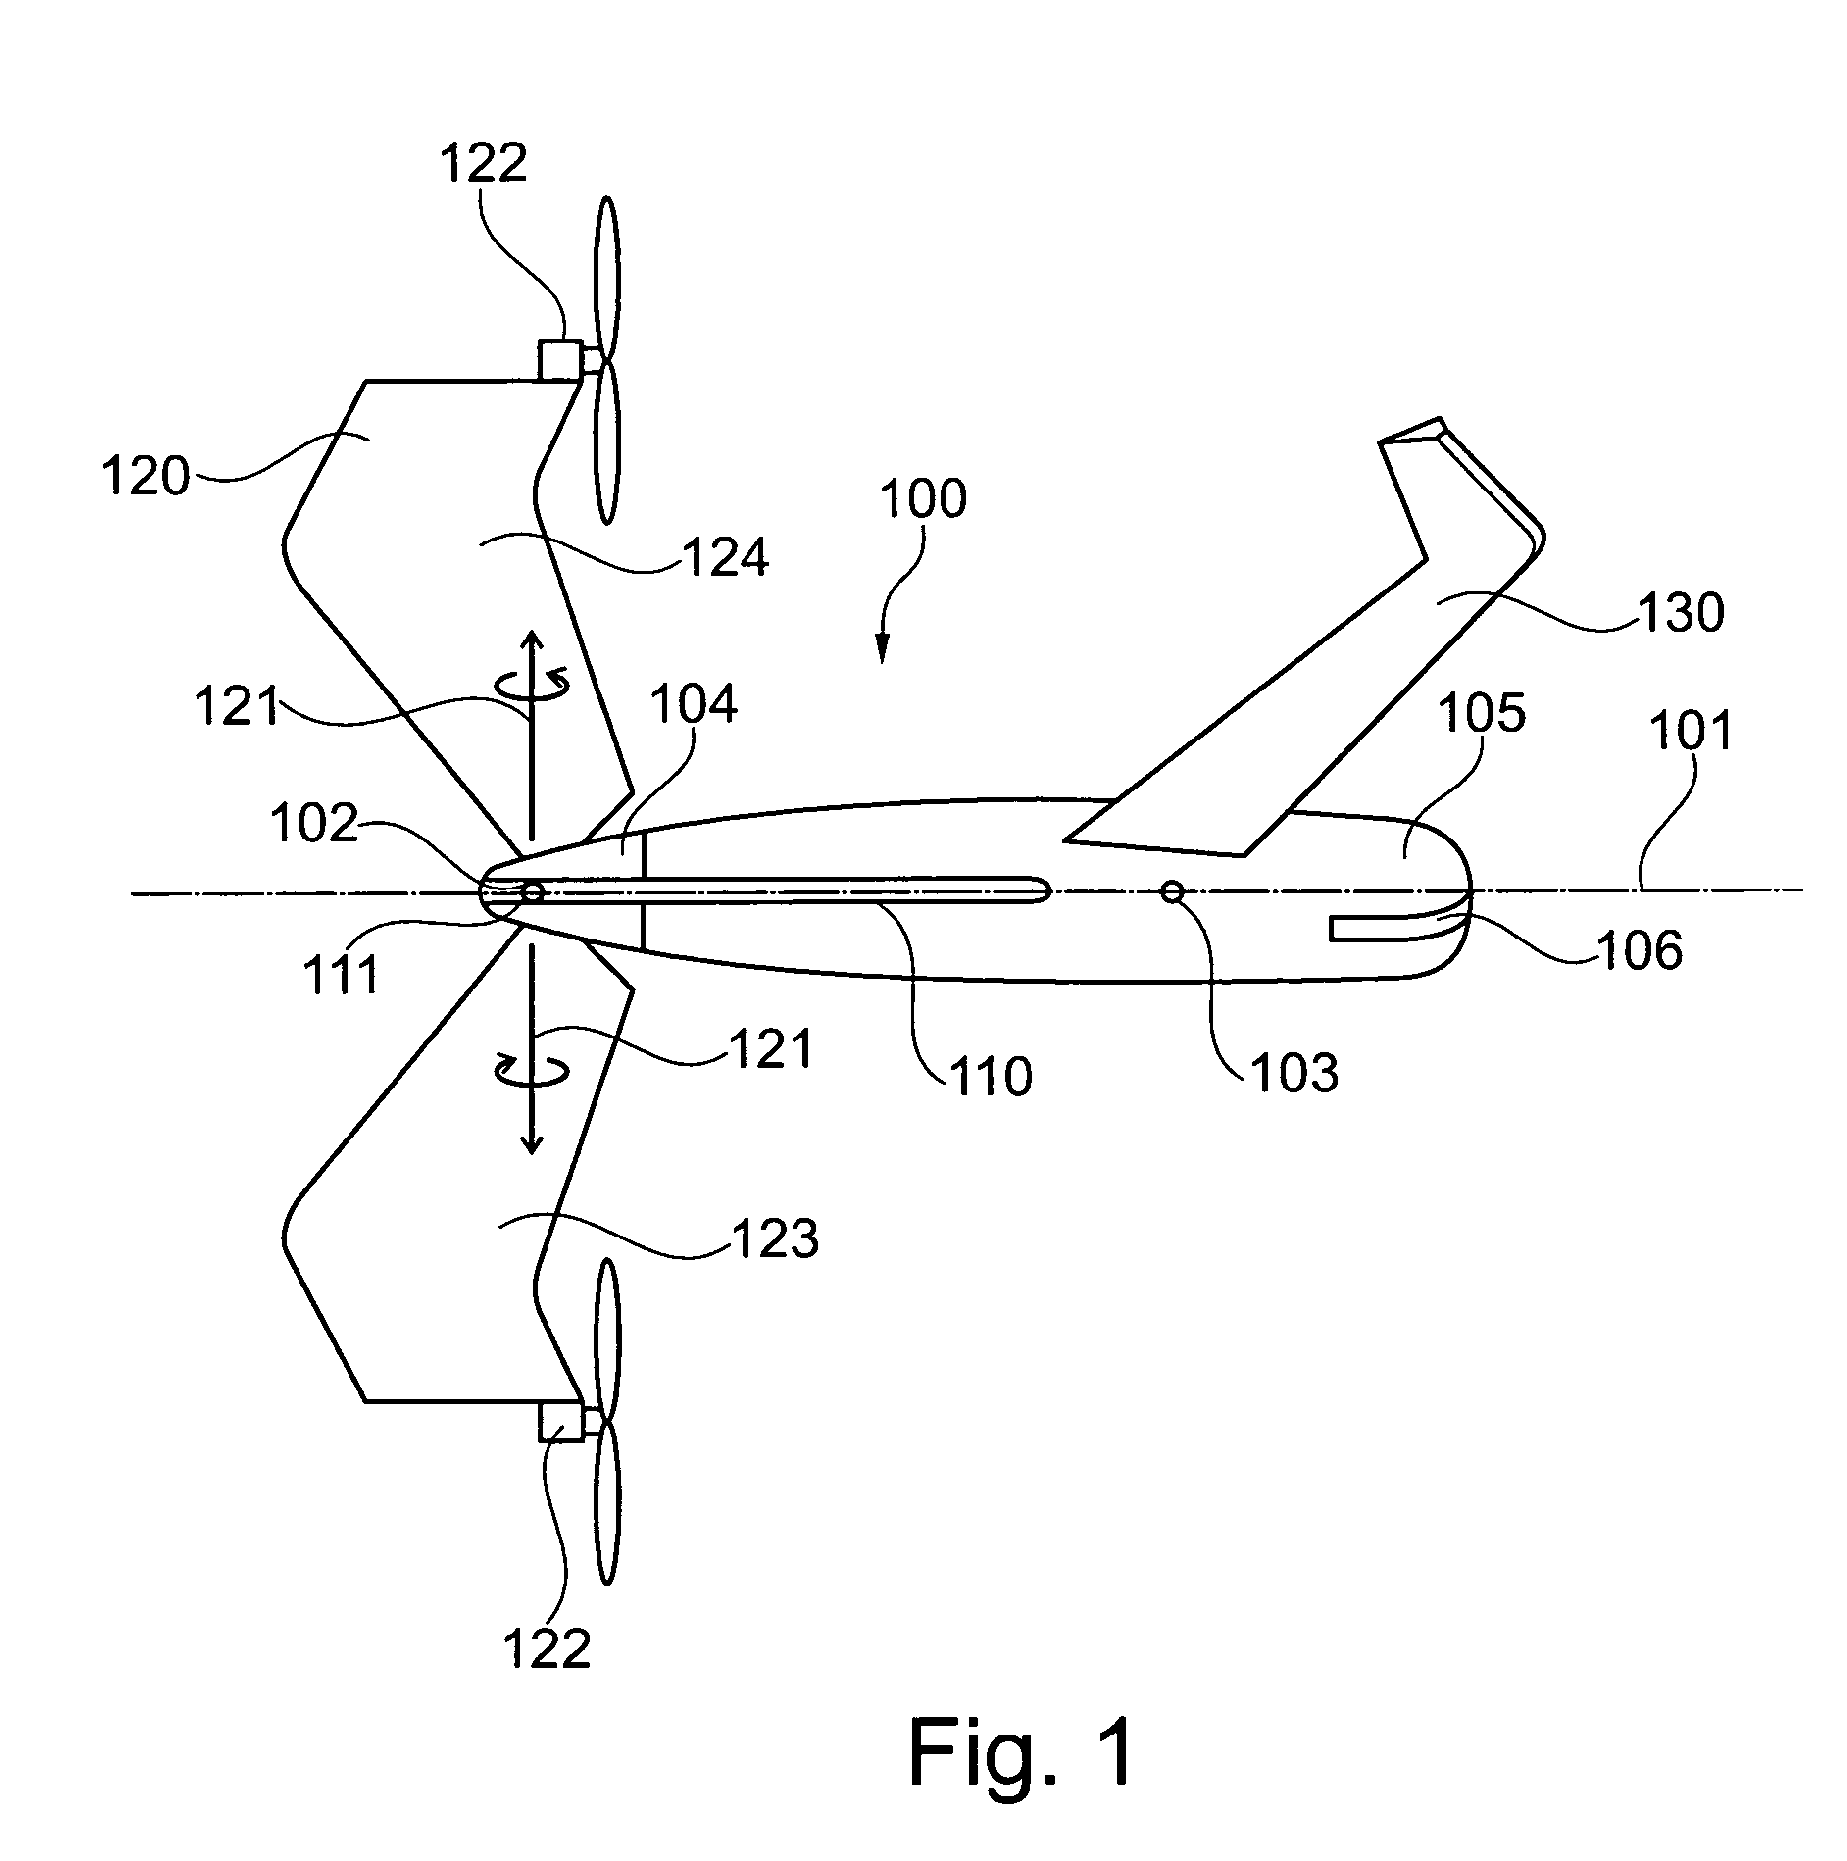 Aircraft for vertical take-off and landing with two wing arrangements